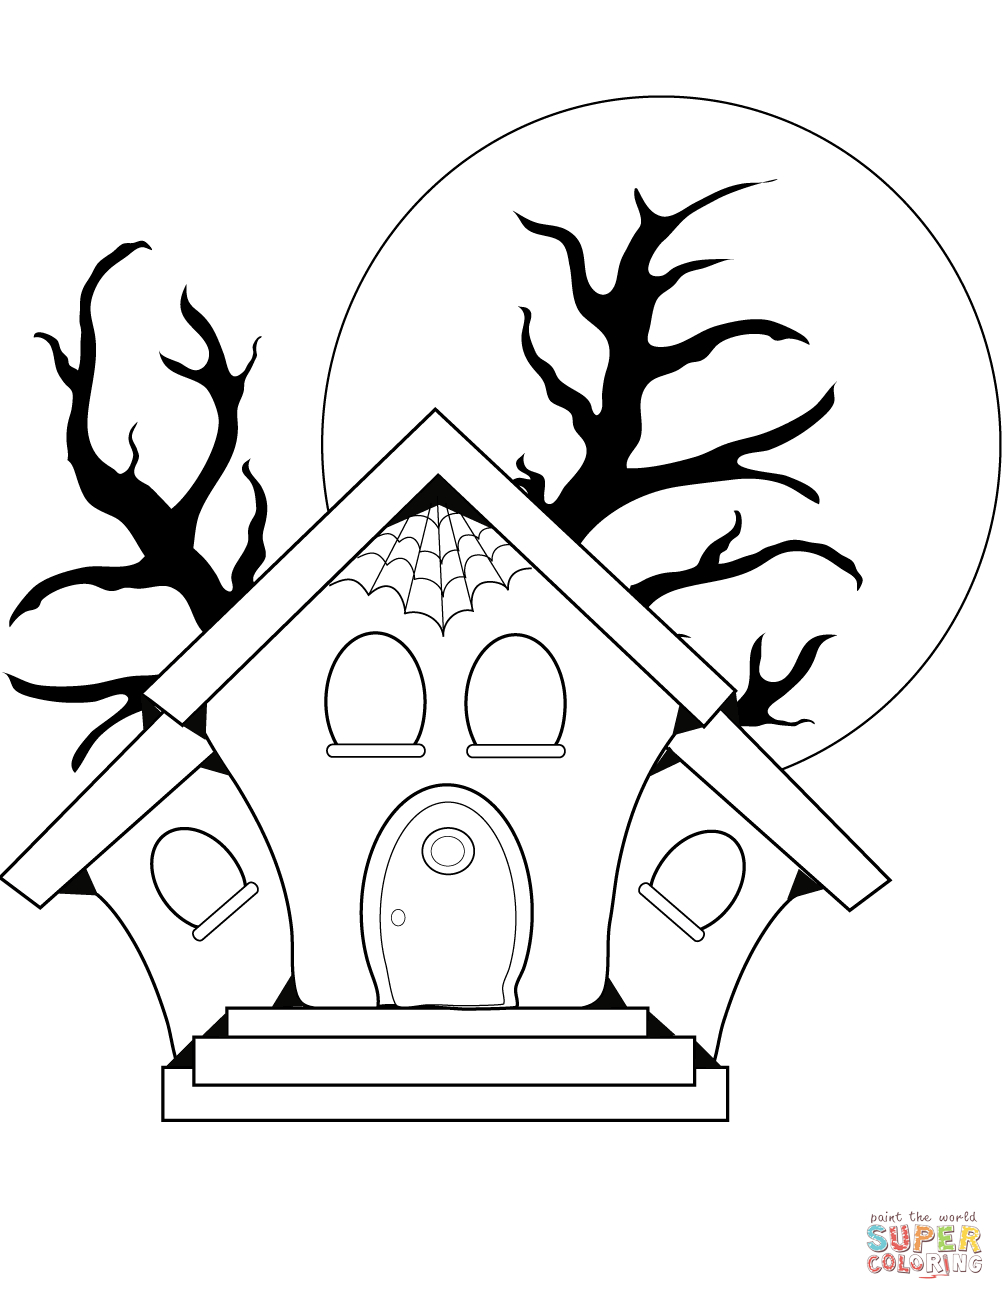 Mansion Coloring Pages Haunted Mansion Drawing At Getdrawings Free For Personal Use